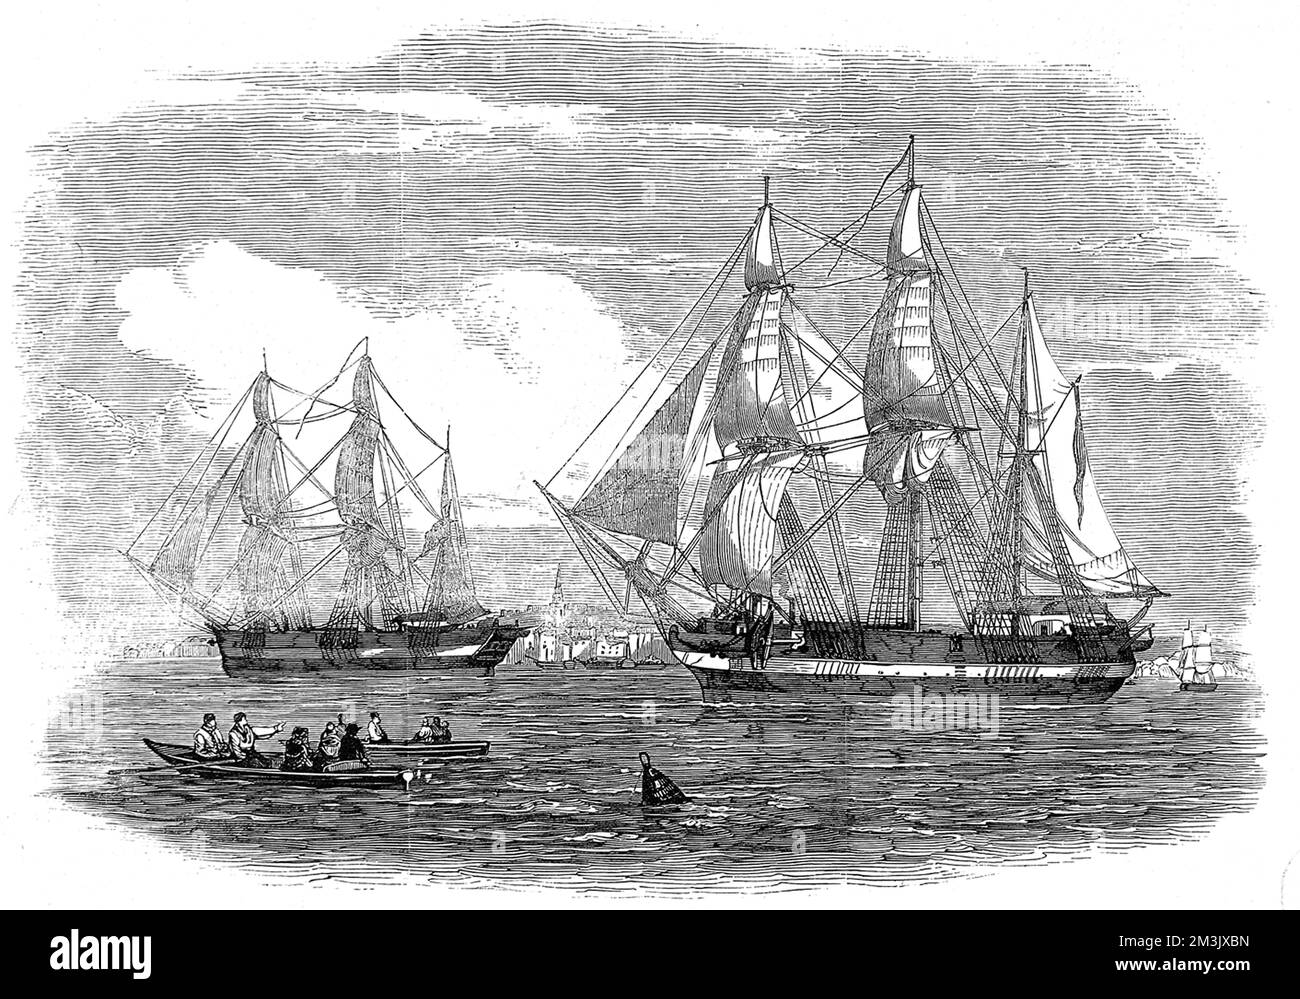 HMS 'Erebus' (left) and HMS 'Terror', pictured on the River Thames, 1845.  In 1845 the British Admiralty sent two polar exploration ships, HMS 'Erebus' and HMS 'Terror', to look for the Northwest passage round the northern coast of Canada. The expedition, commanded by Sir John Franklin, disappeared from view late in 1845 and none of the men were ever seen again.   In fact the ships made it to the King William Island region, then got stuck in the ice. With supplies running out the surviving crew abandoned ship and headed south. However, none made it to safety and it is assumed all died Stock Photo